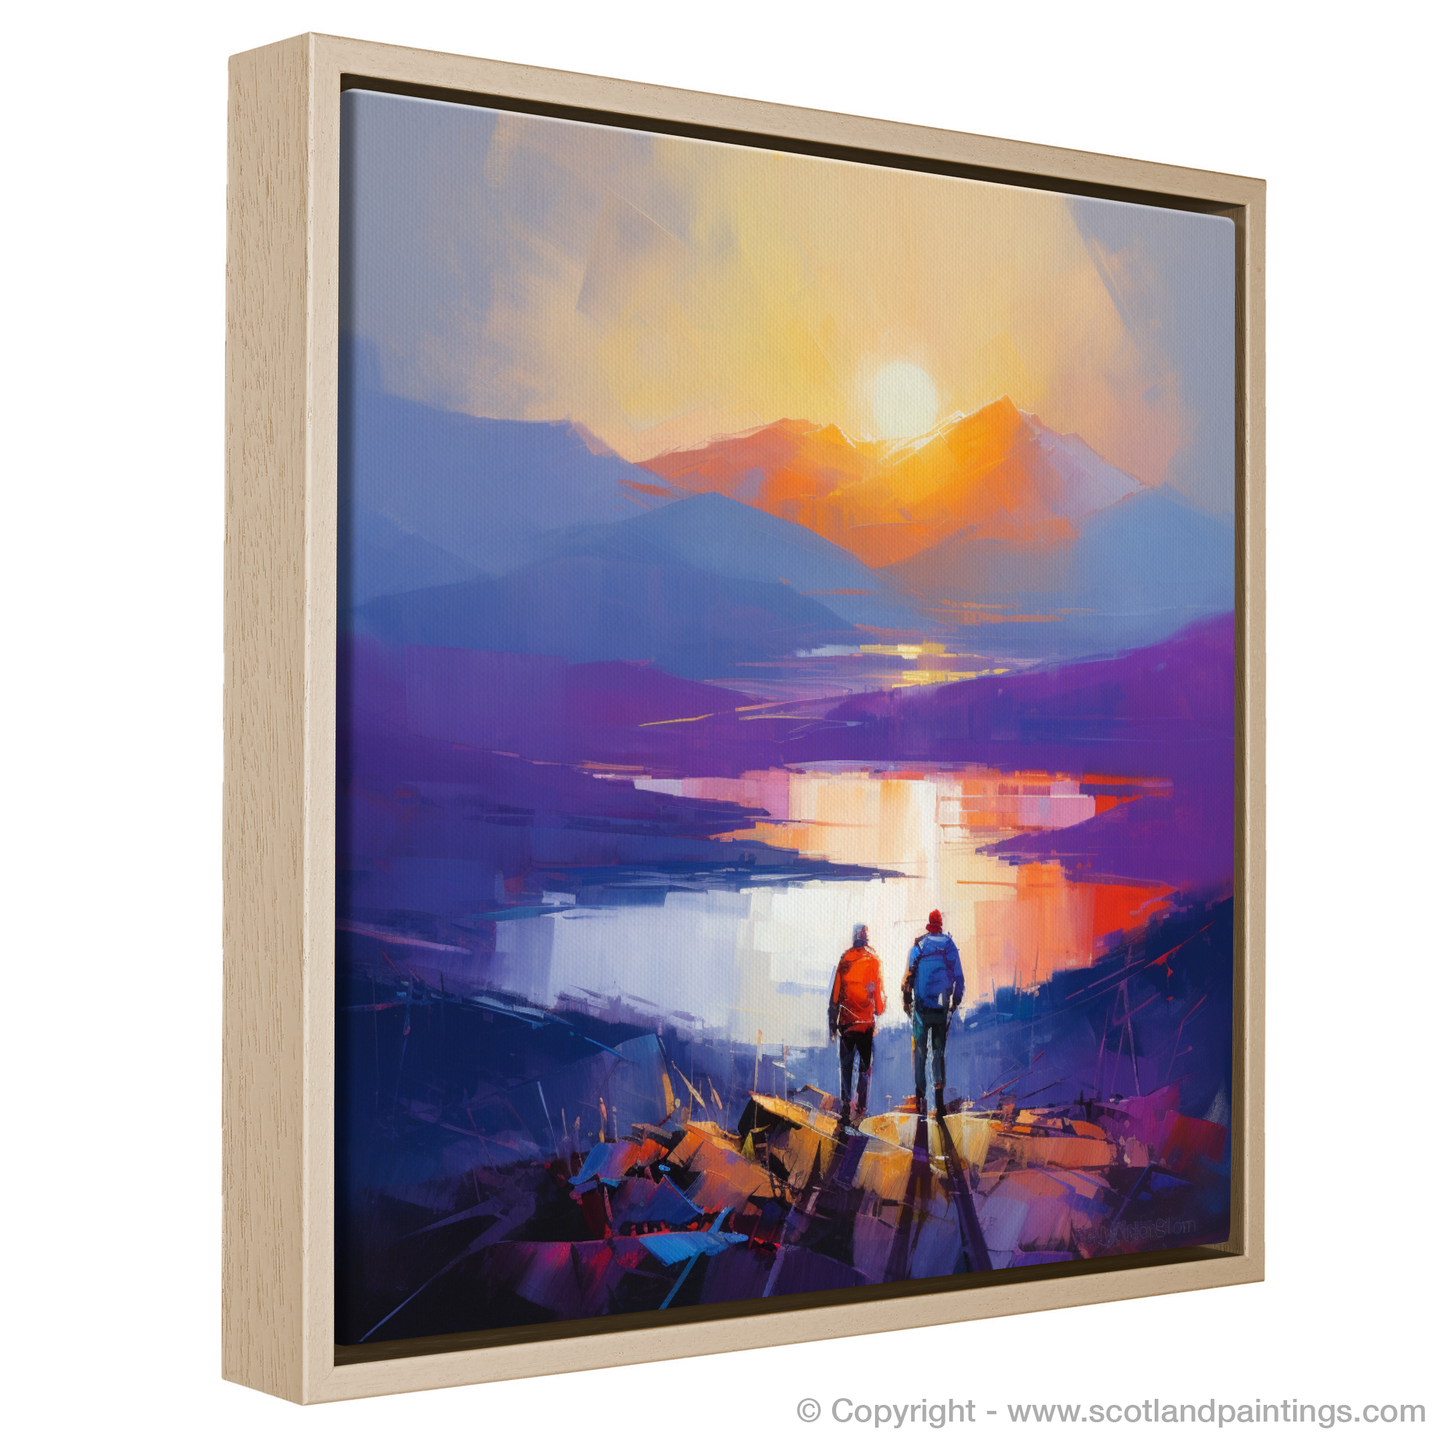 Painting and Art Print of Two hikers looking out on Loch Lomond entitled "Sunset Solace: Two Hikers by Loch Lomond".